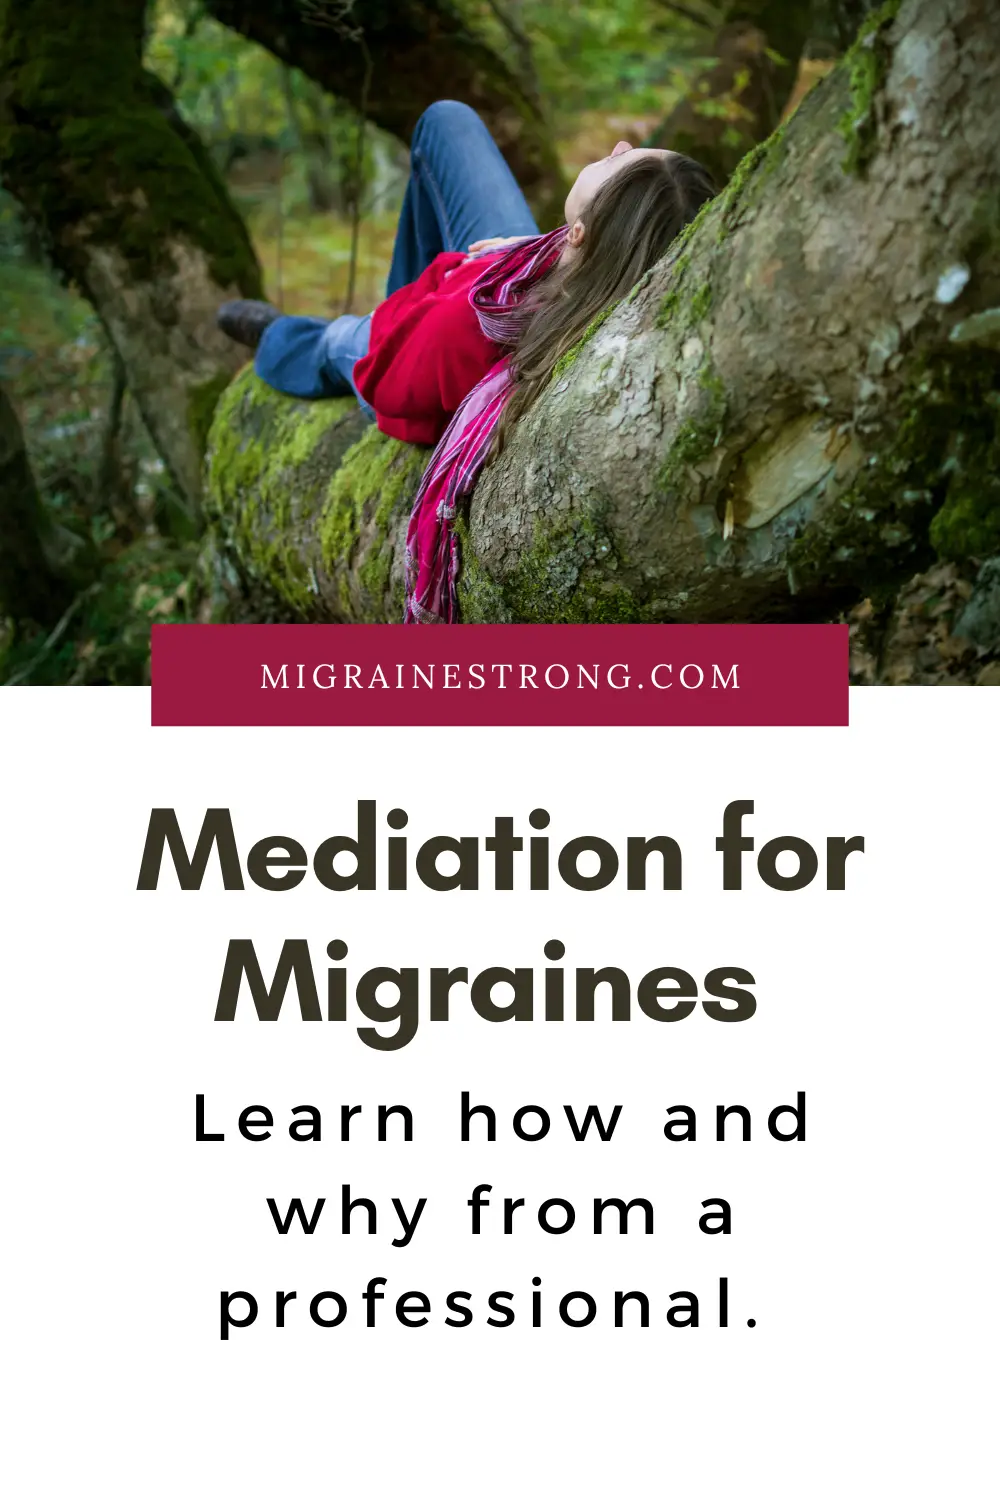 Migraine Meditation- Learn From a Professional